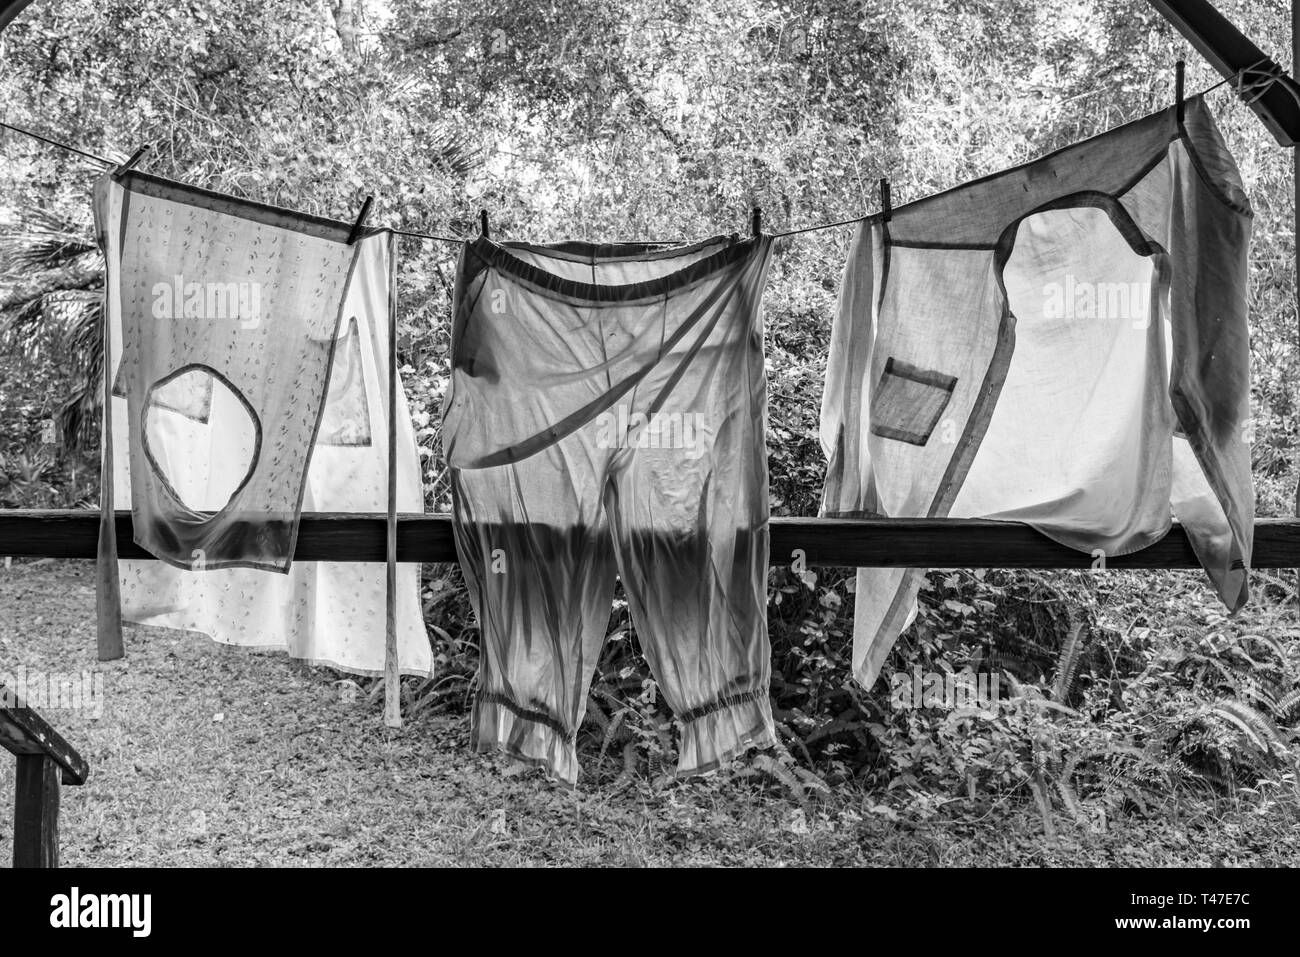 Black and White Photograph of Laundry Hanging on Clothesline Stock Photo